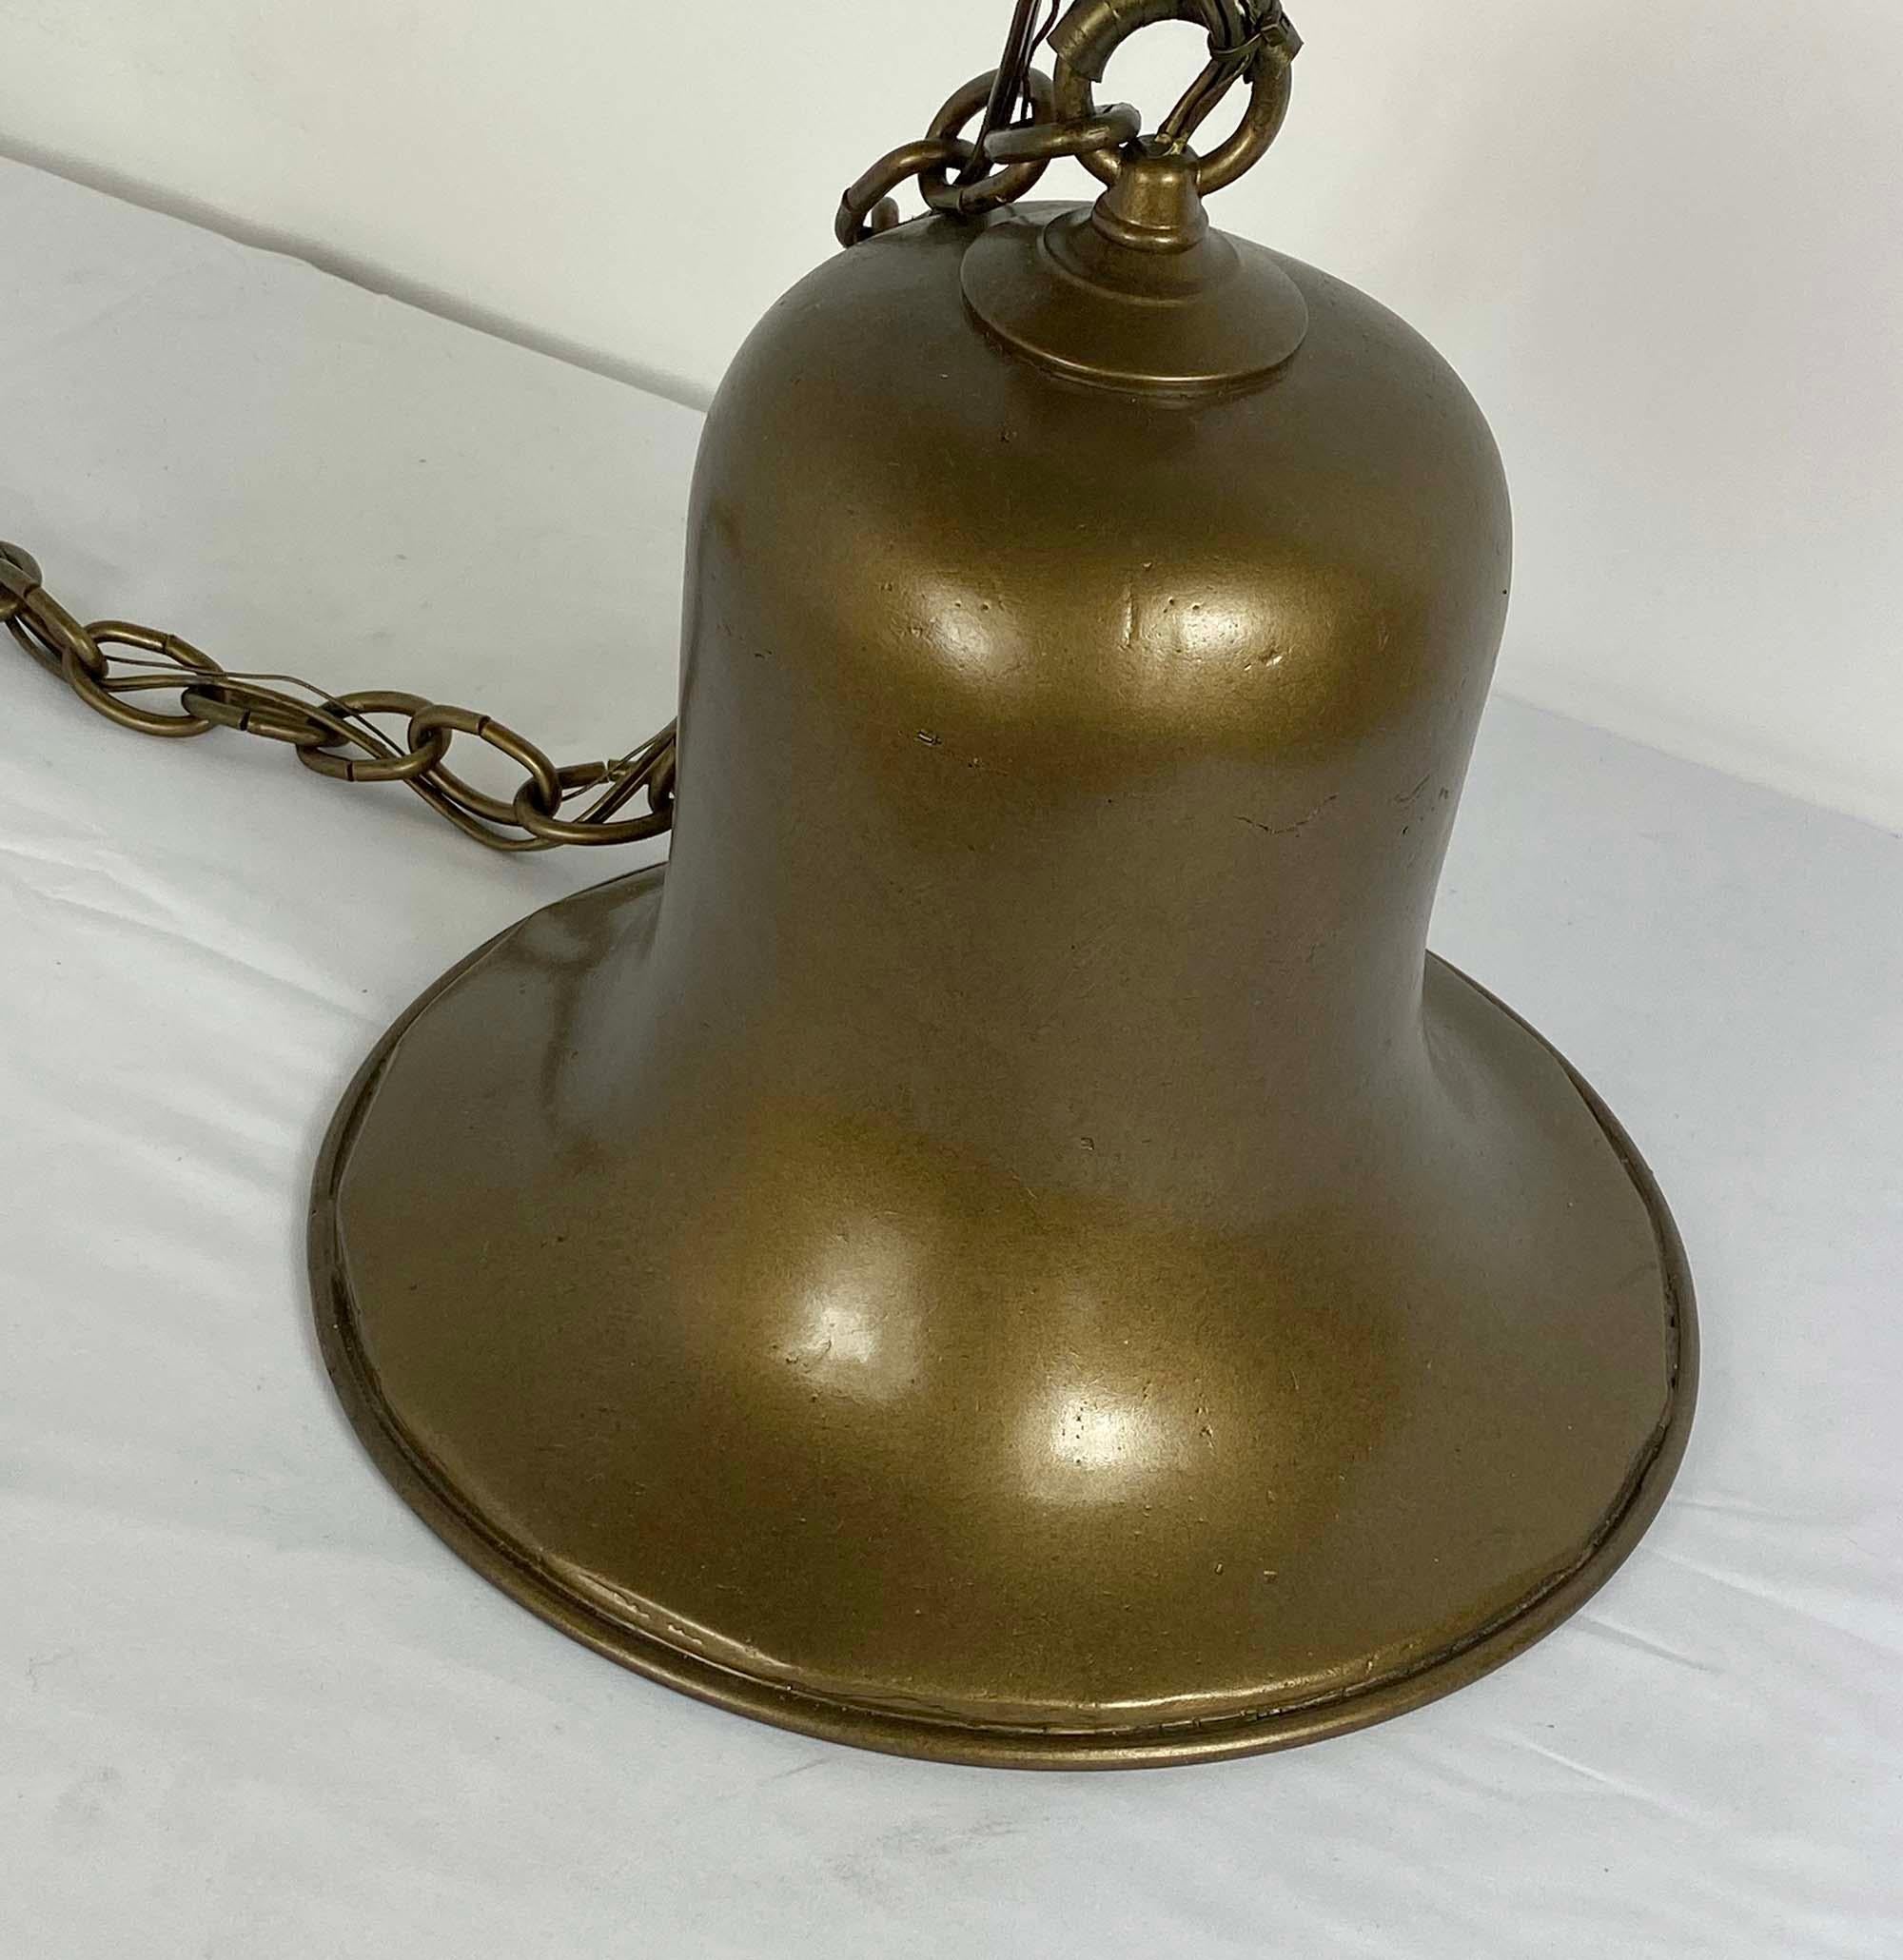 This cast iron pub bell with antique brass finish was hanging in the Ralph Lauren store in New York. We made this version for a customer in that city for their home pub. It does not ring, will make a statement in your Pub.